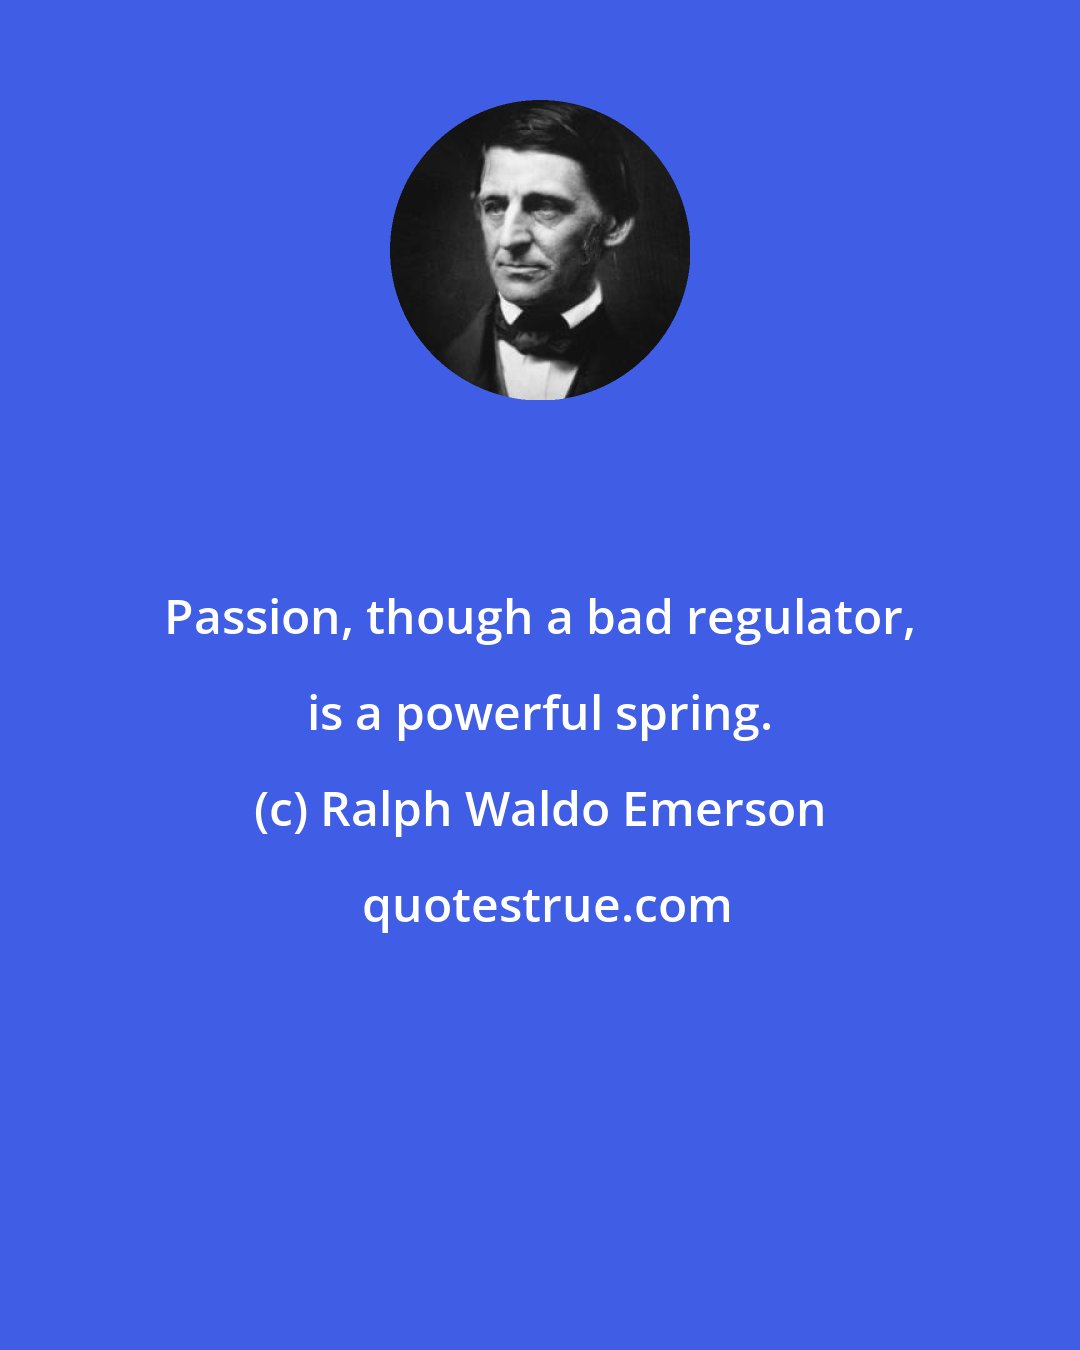 Ralph Waldo Emerson: Passion, though a bad regulator, is a powerful spring.